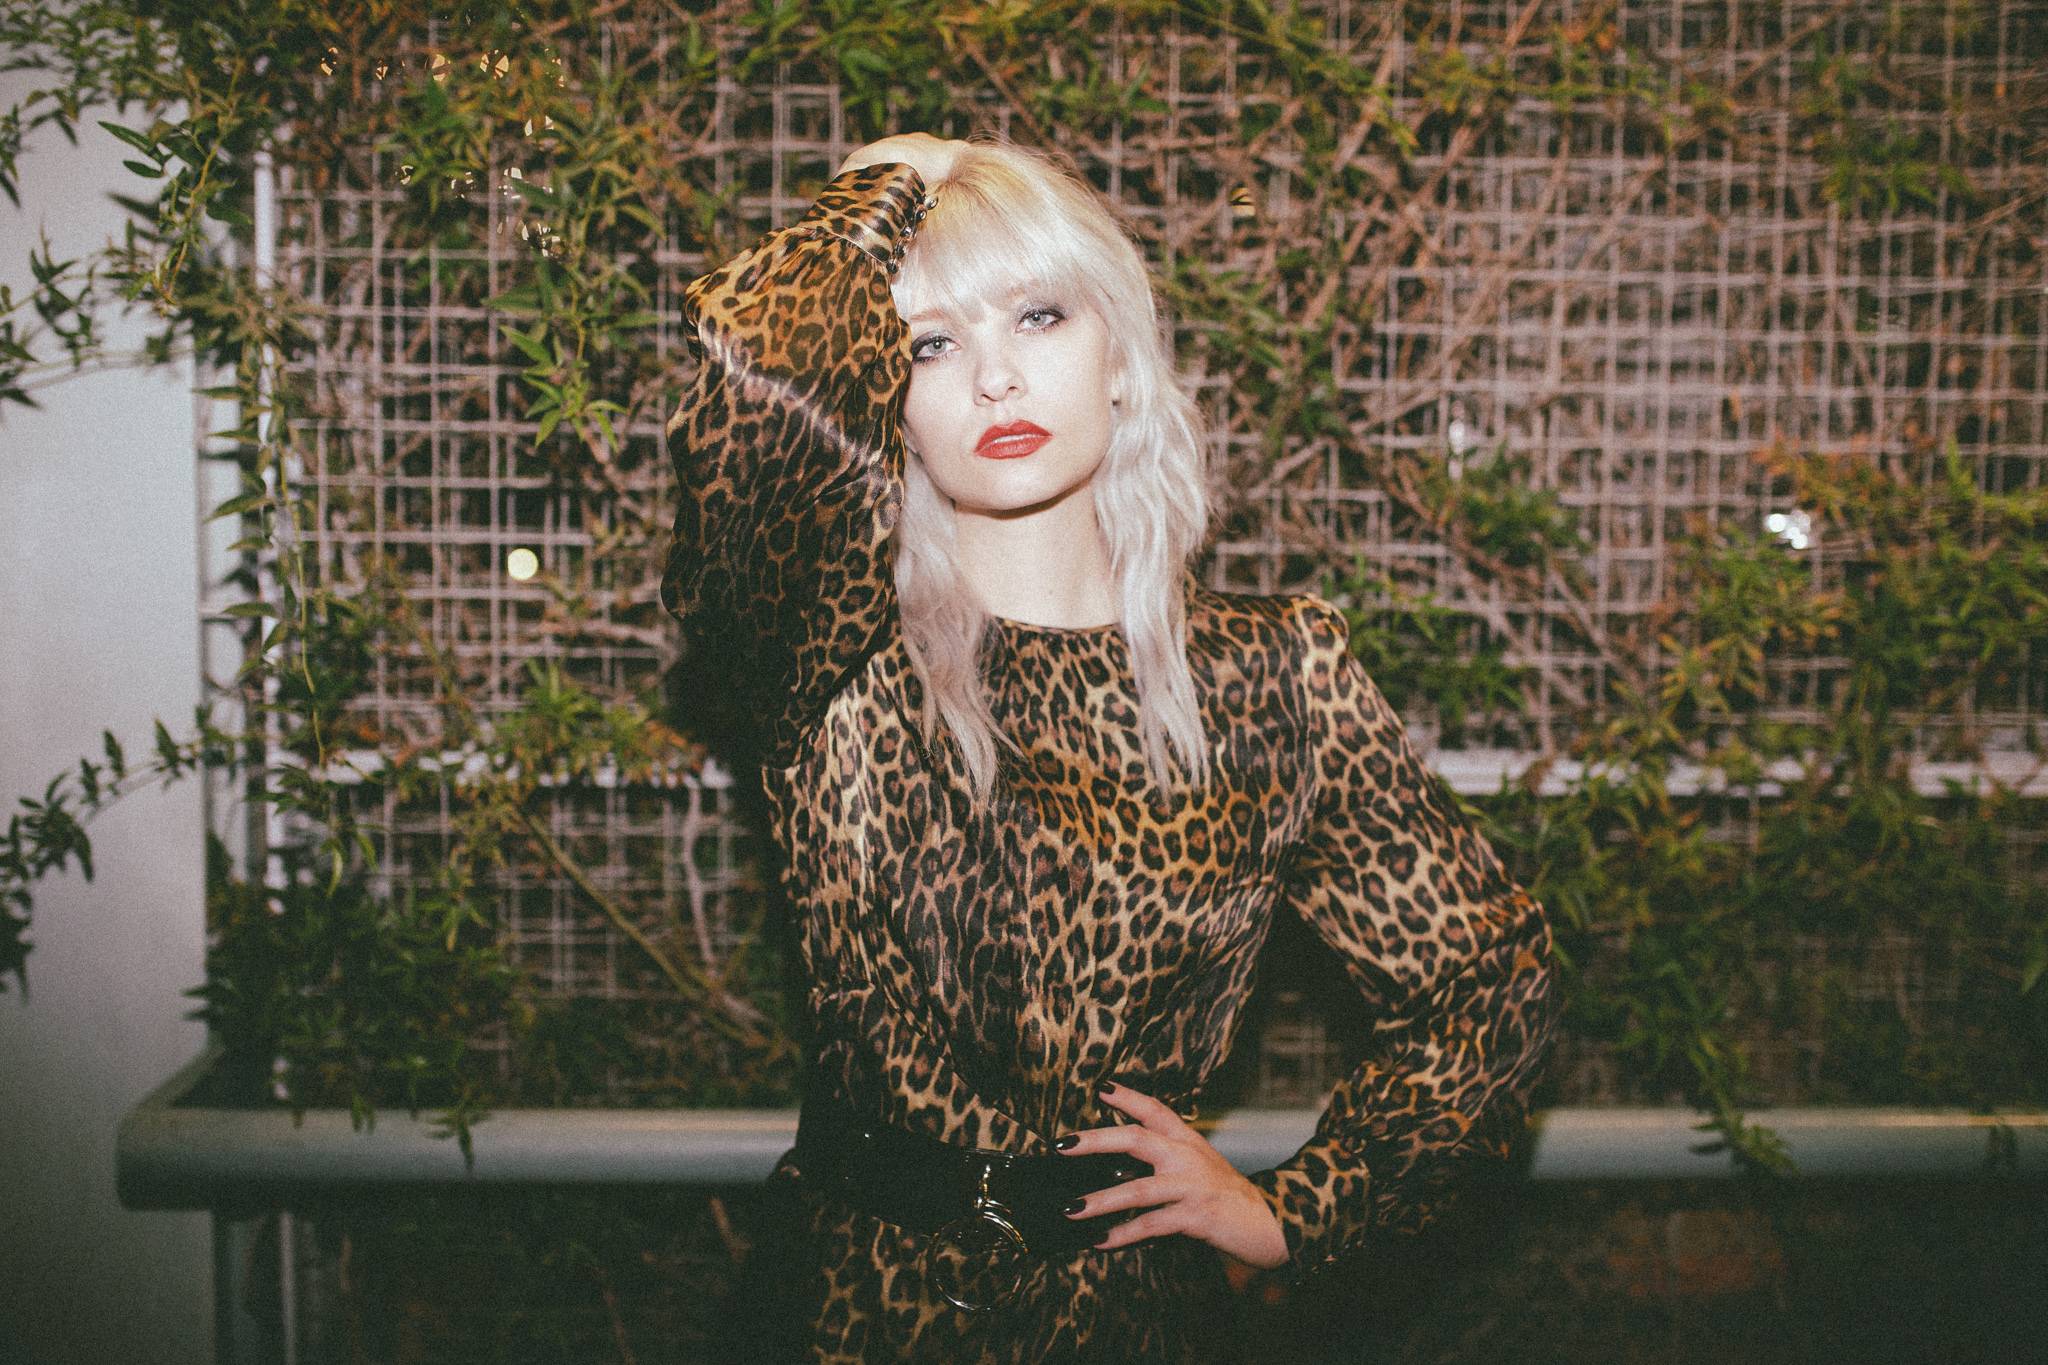 Trina in a leopard dress standing in bront of a brick wall with vines on it